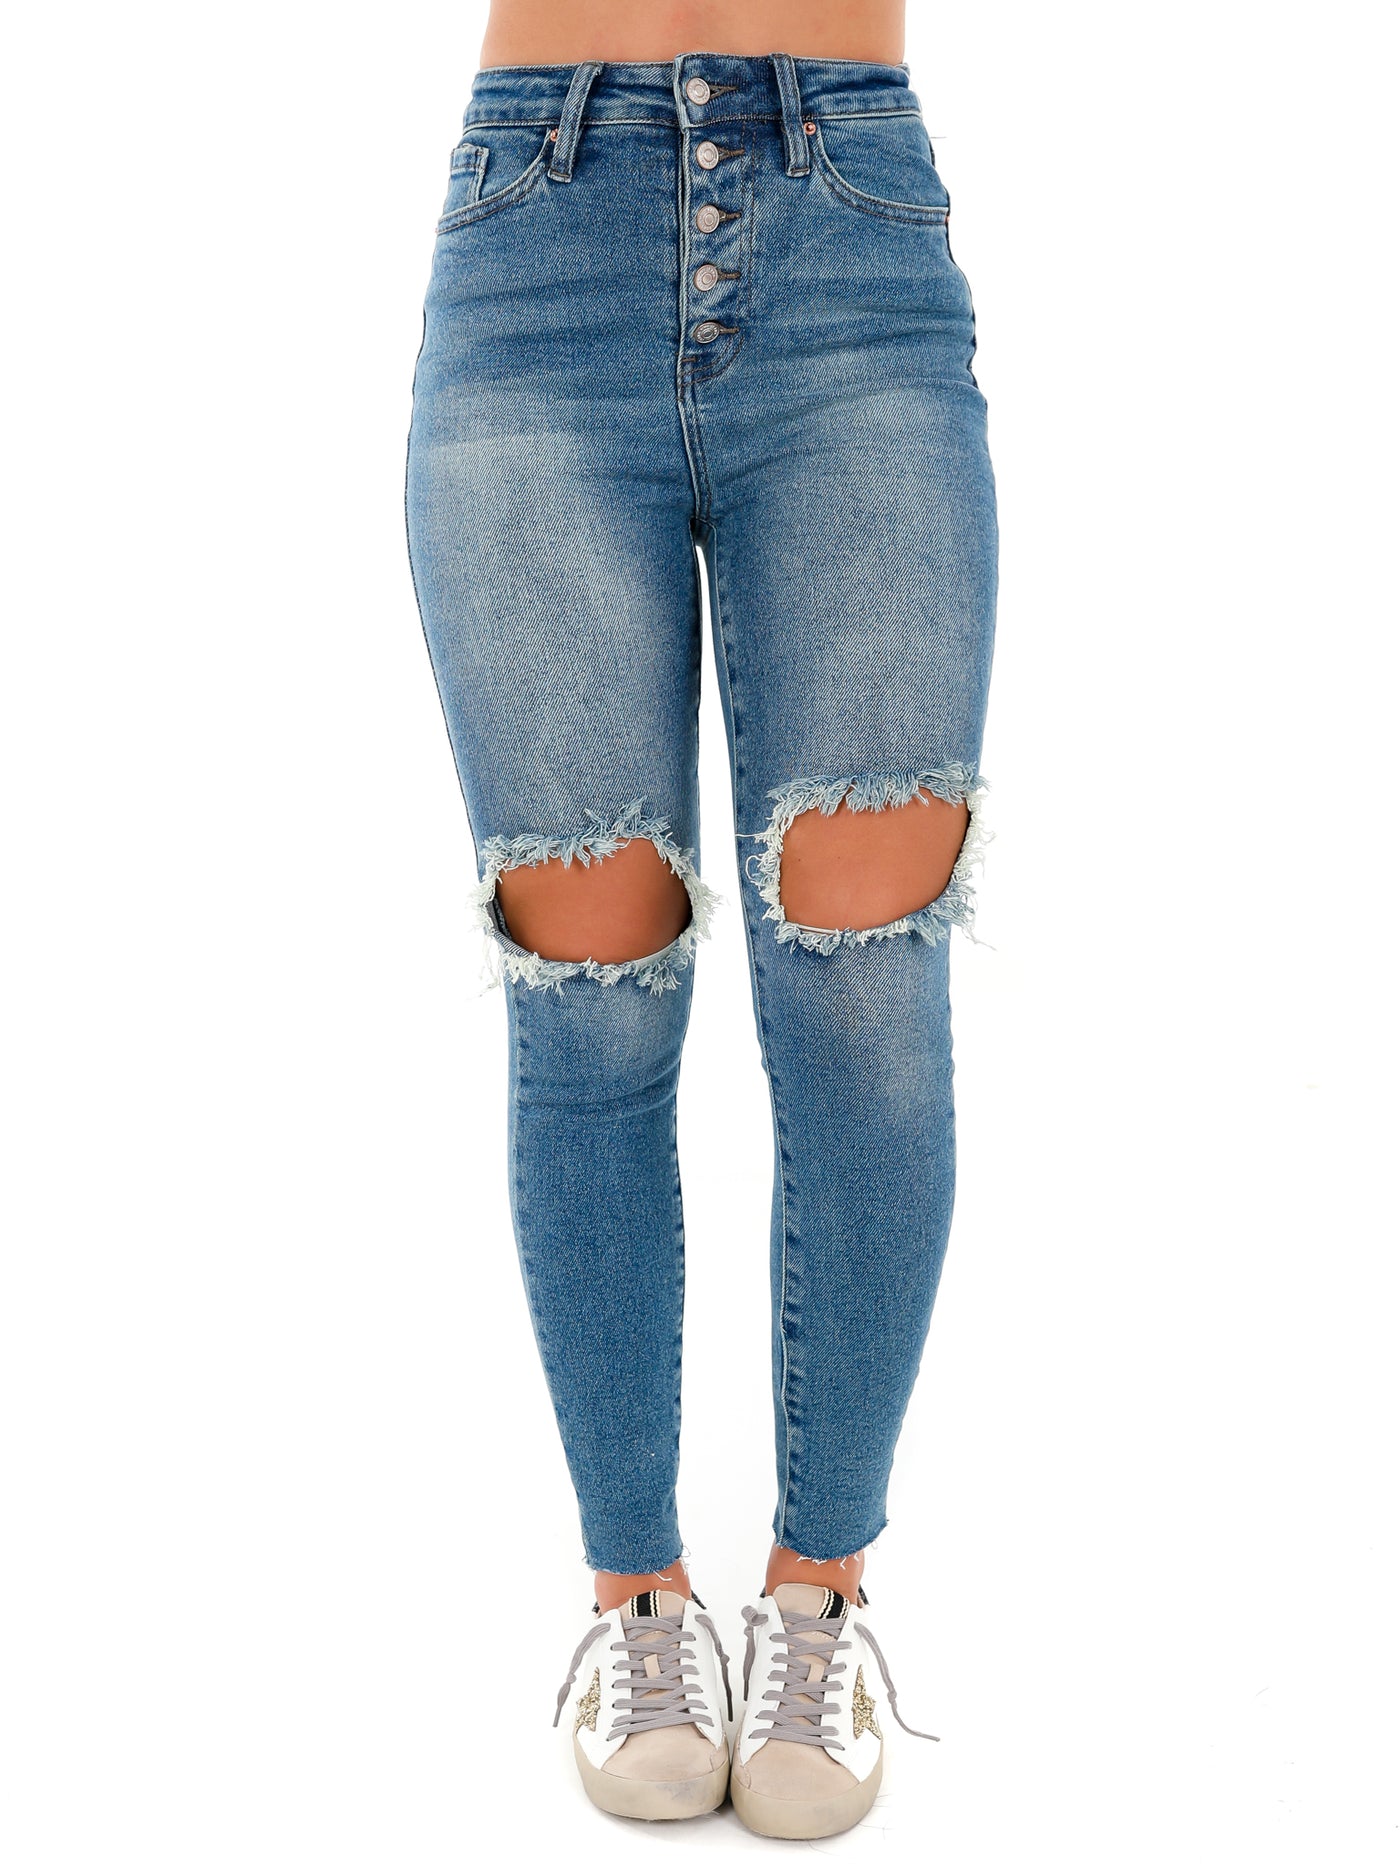 Past Due Exposed Button Ankle Jeans